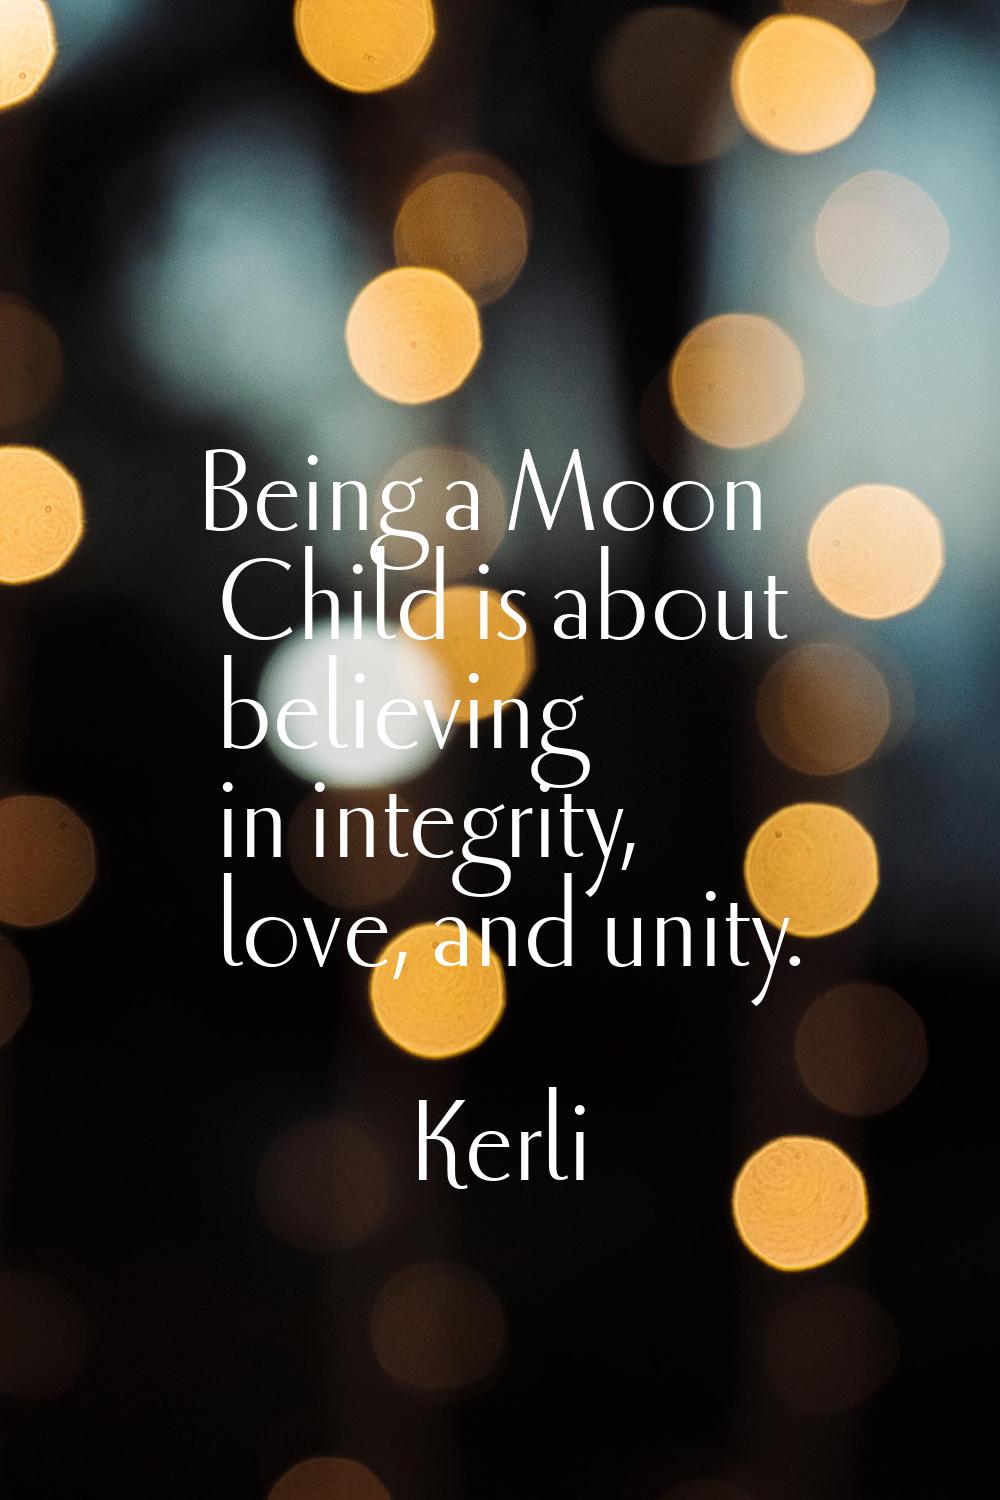 Being a Moon Child is about believing in integrity, love, and unity.